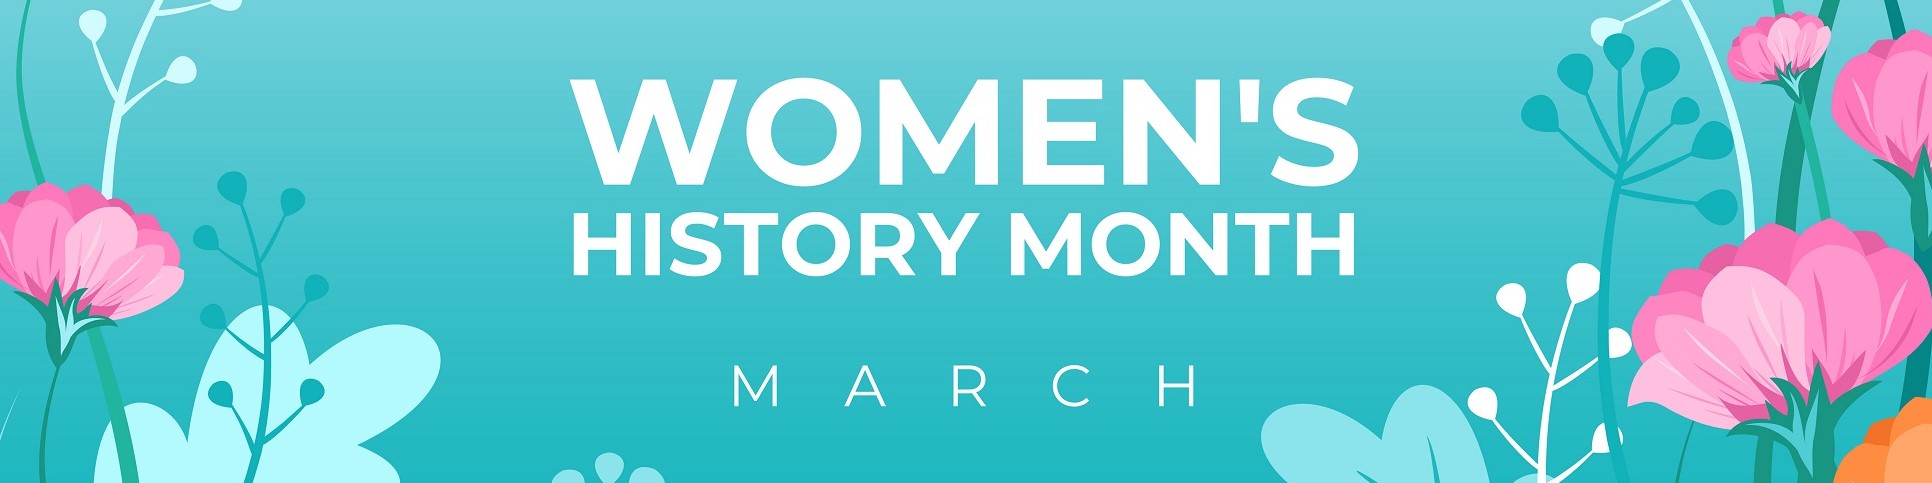 Women's History Month: Empowering Quotes from Inspiring Women